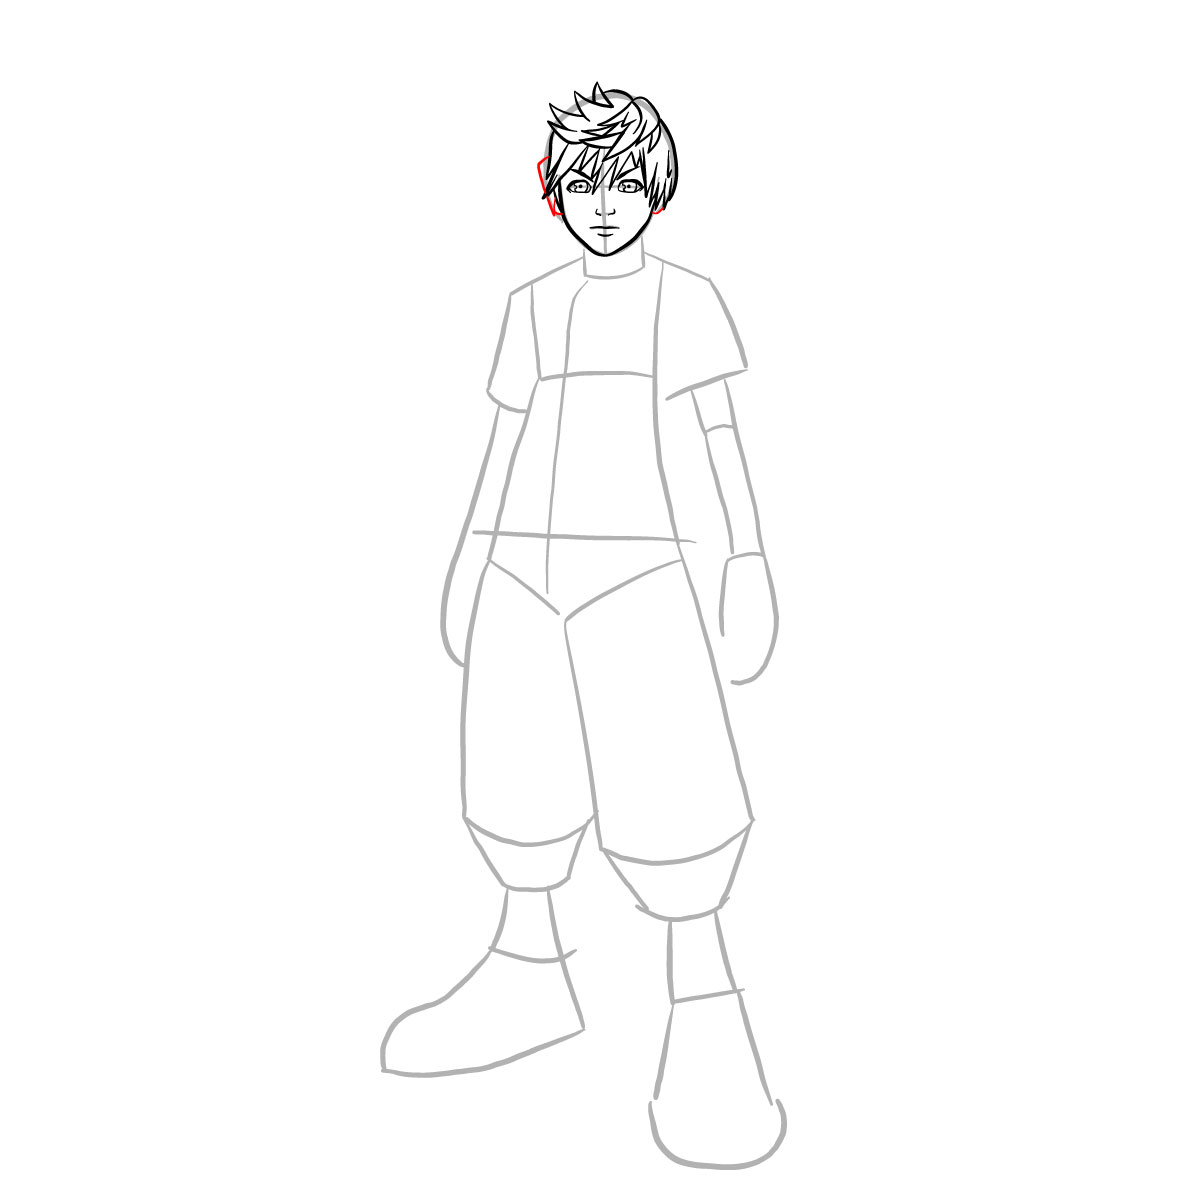 How to draw Ventus - step 15